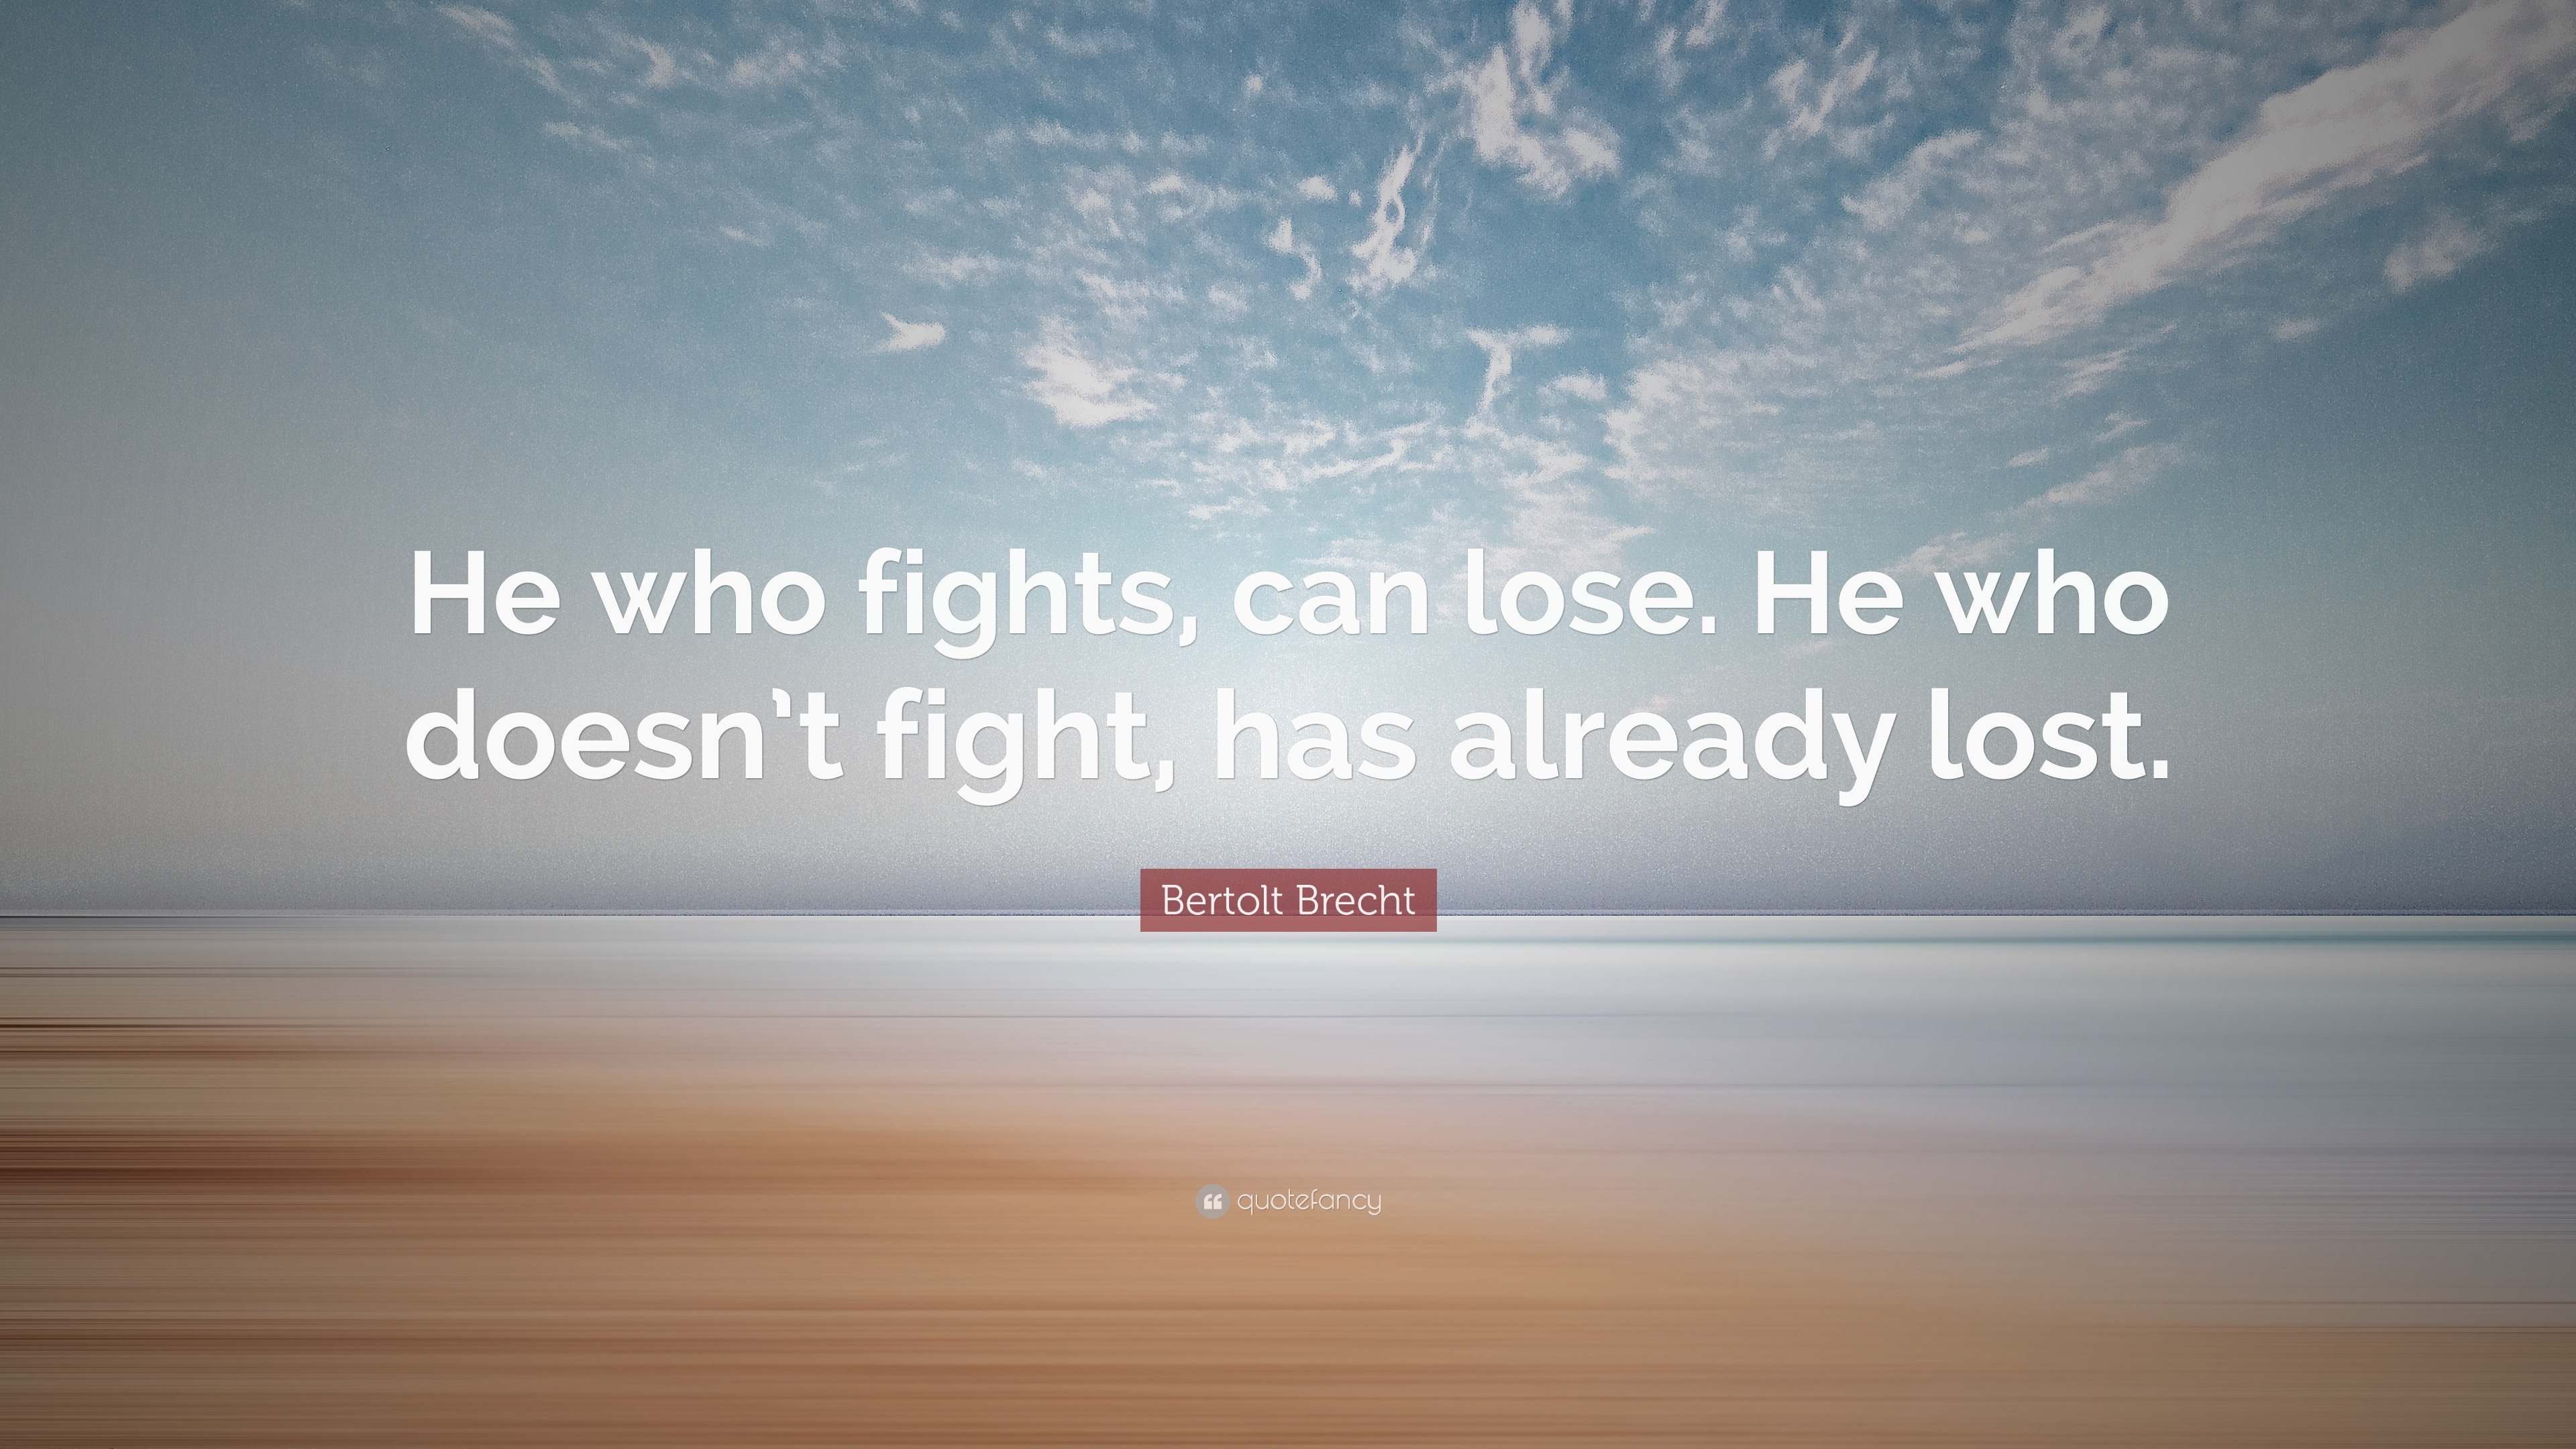 Bertolt Brecht Quote: “He who fights, can lose. He who doesn’t fight ...